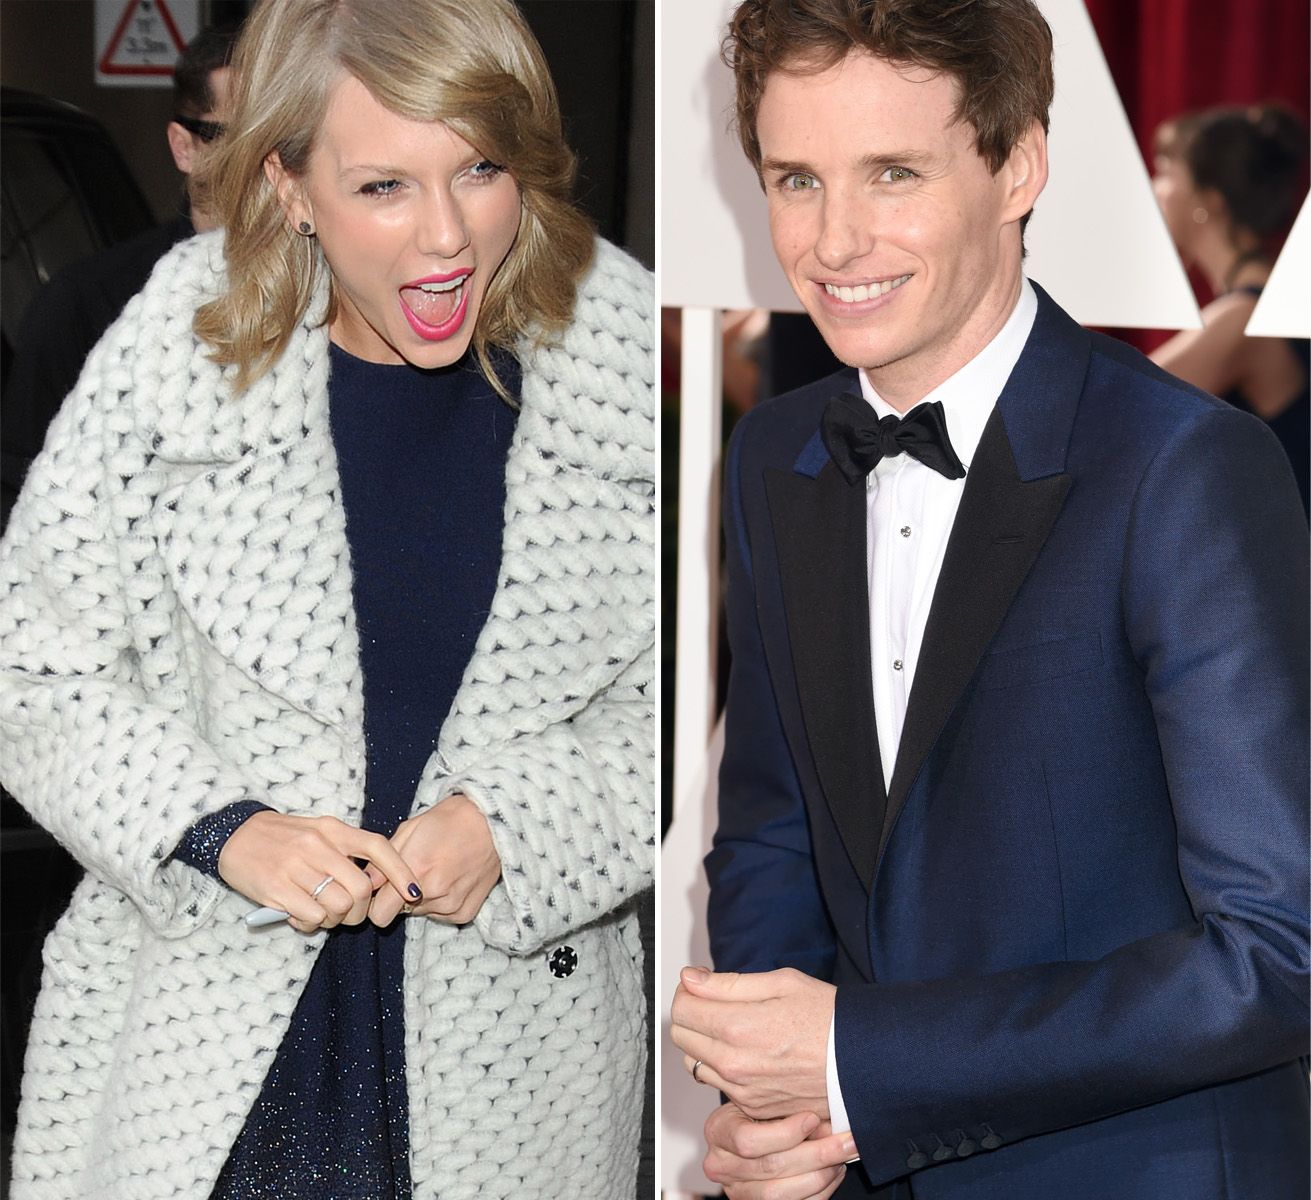 Here’s What Eddie Redmayne Has To Say About Relationship Rumours With Taylor Swift